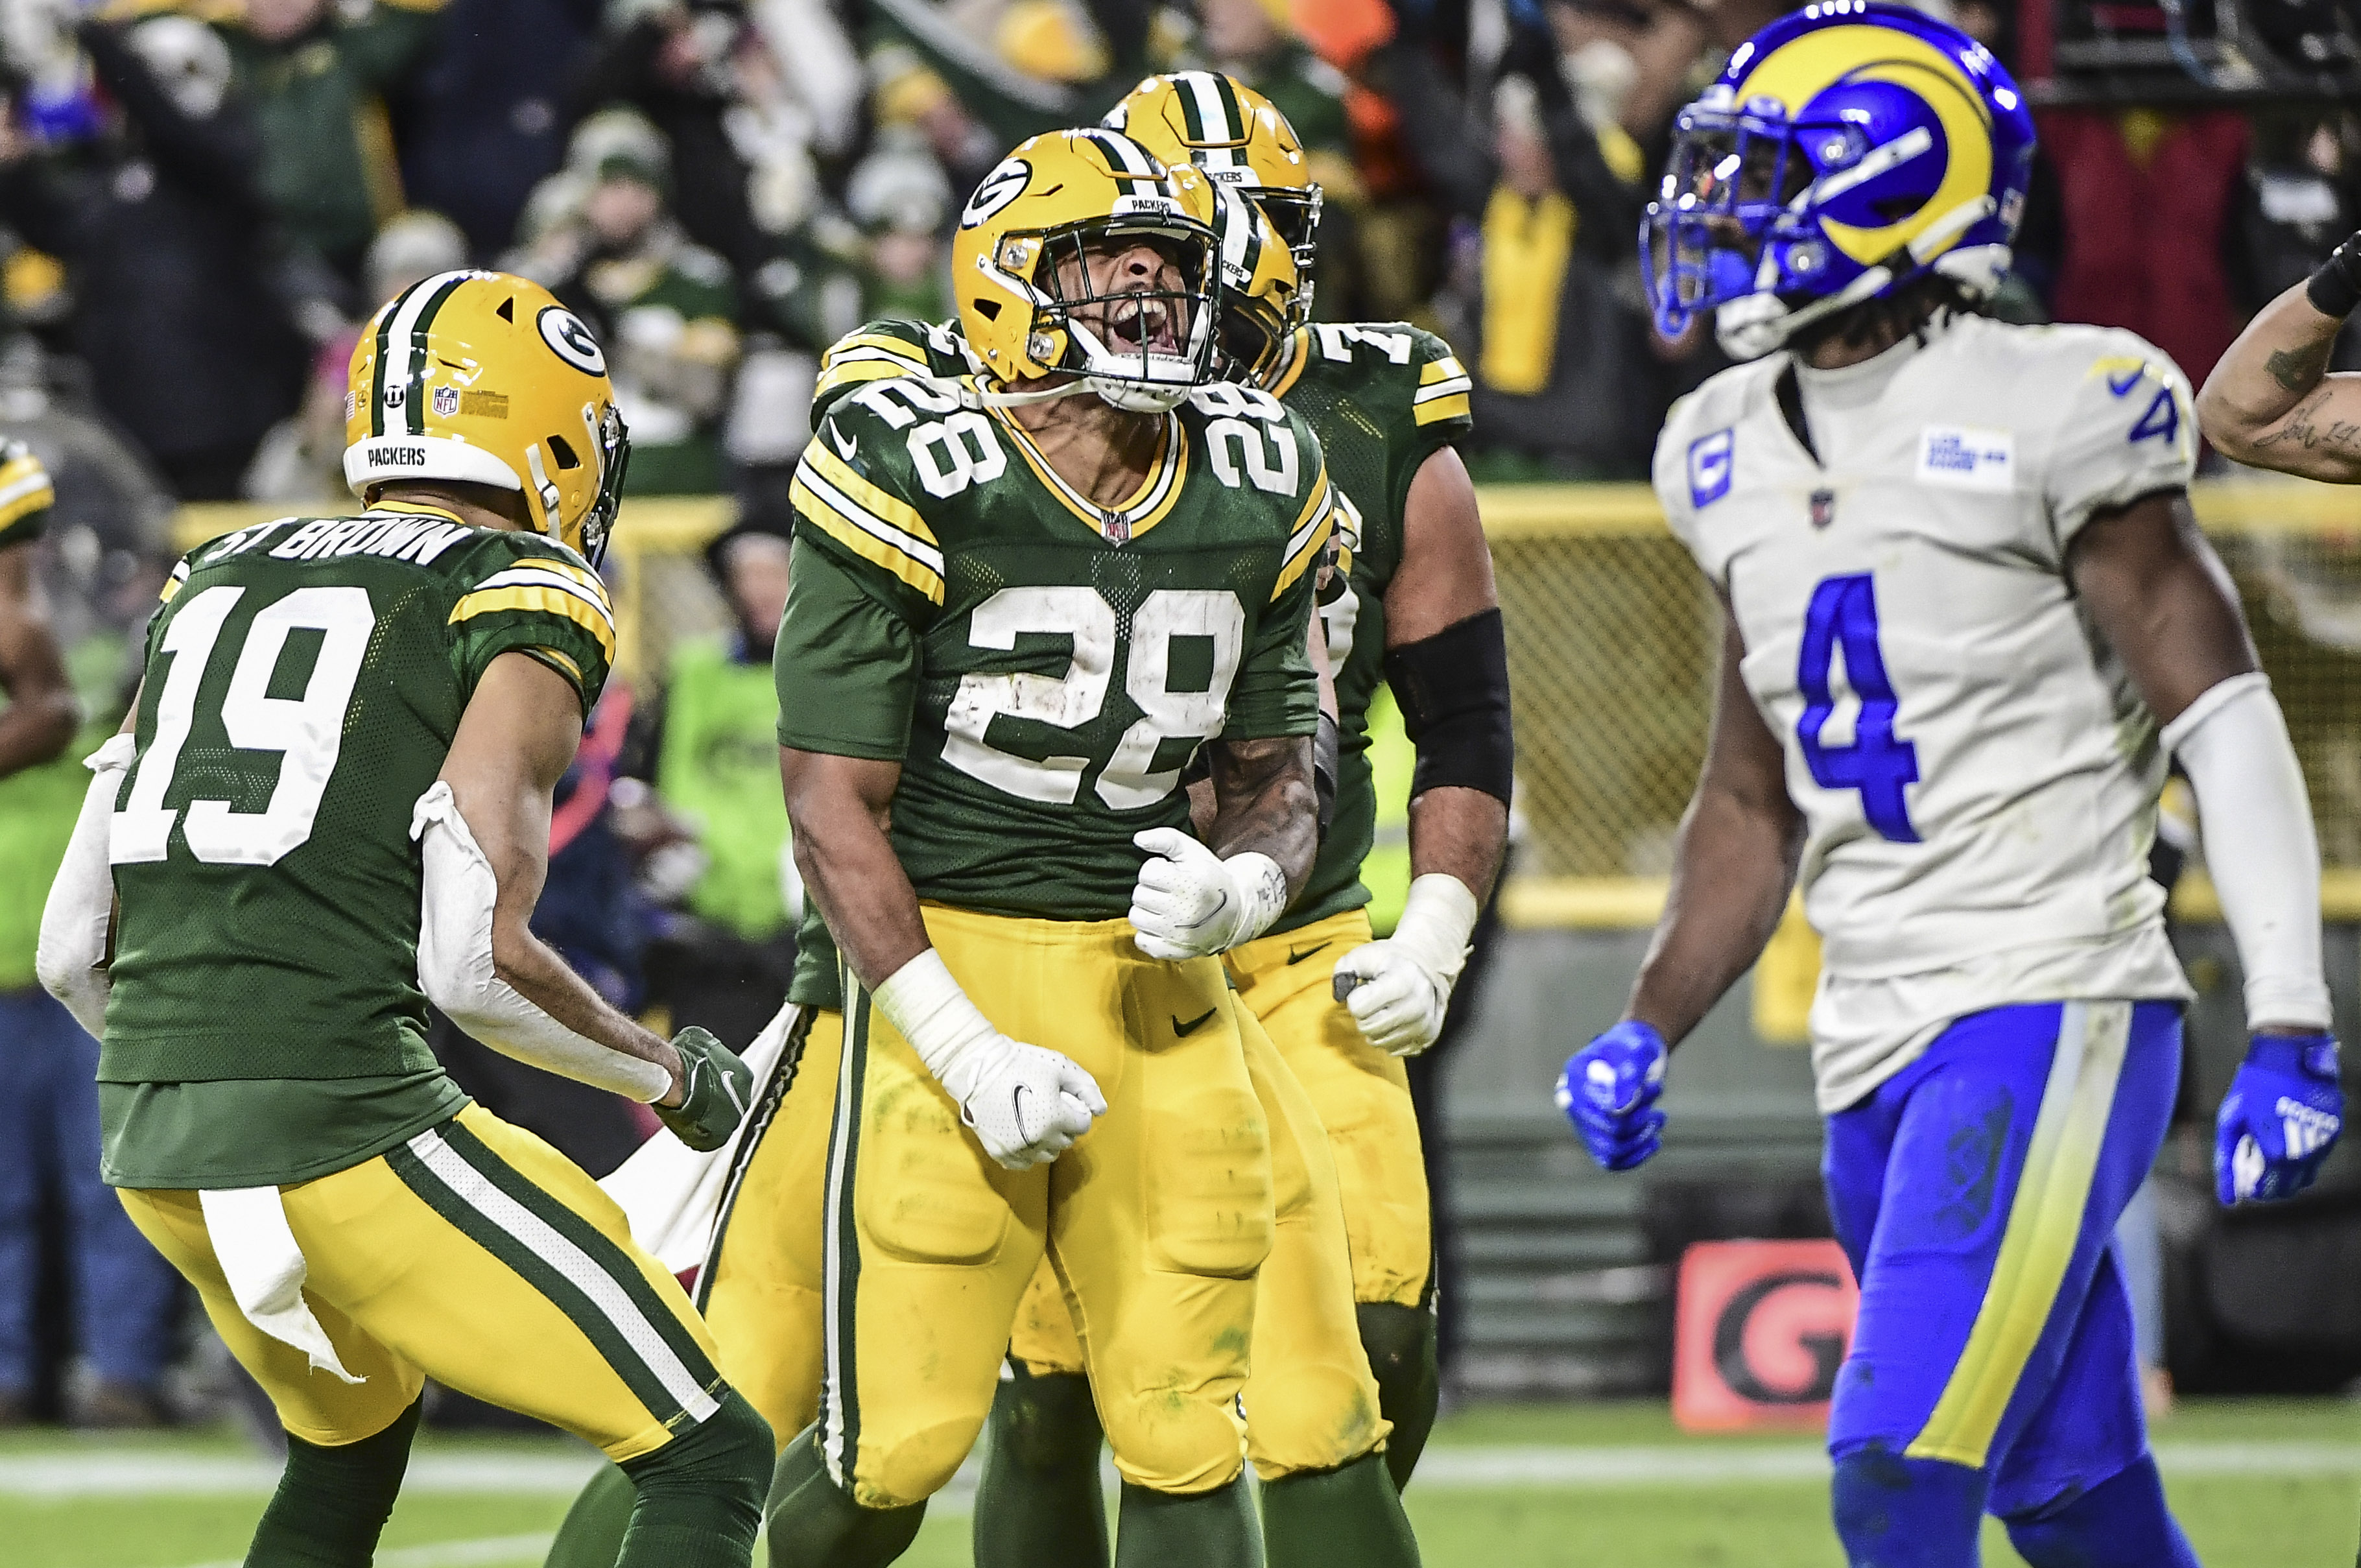 Packers fans could use fewer Davante Adams stats during Fox broadcast